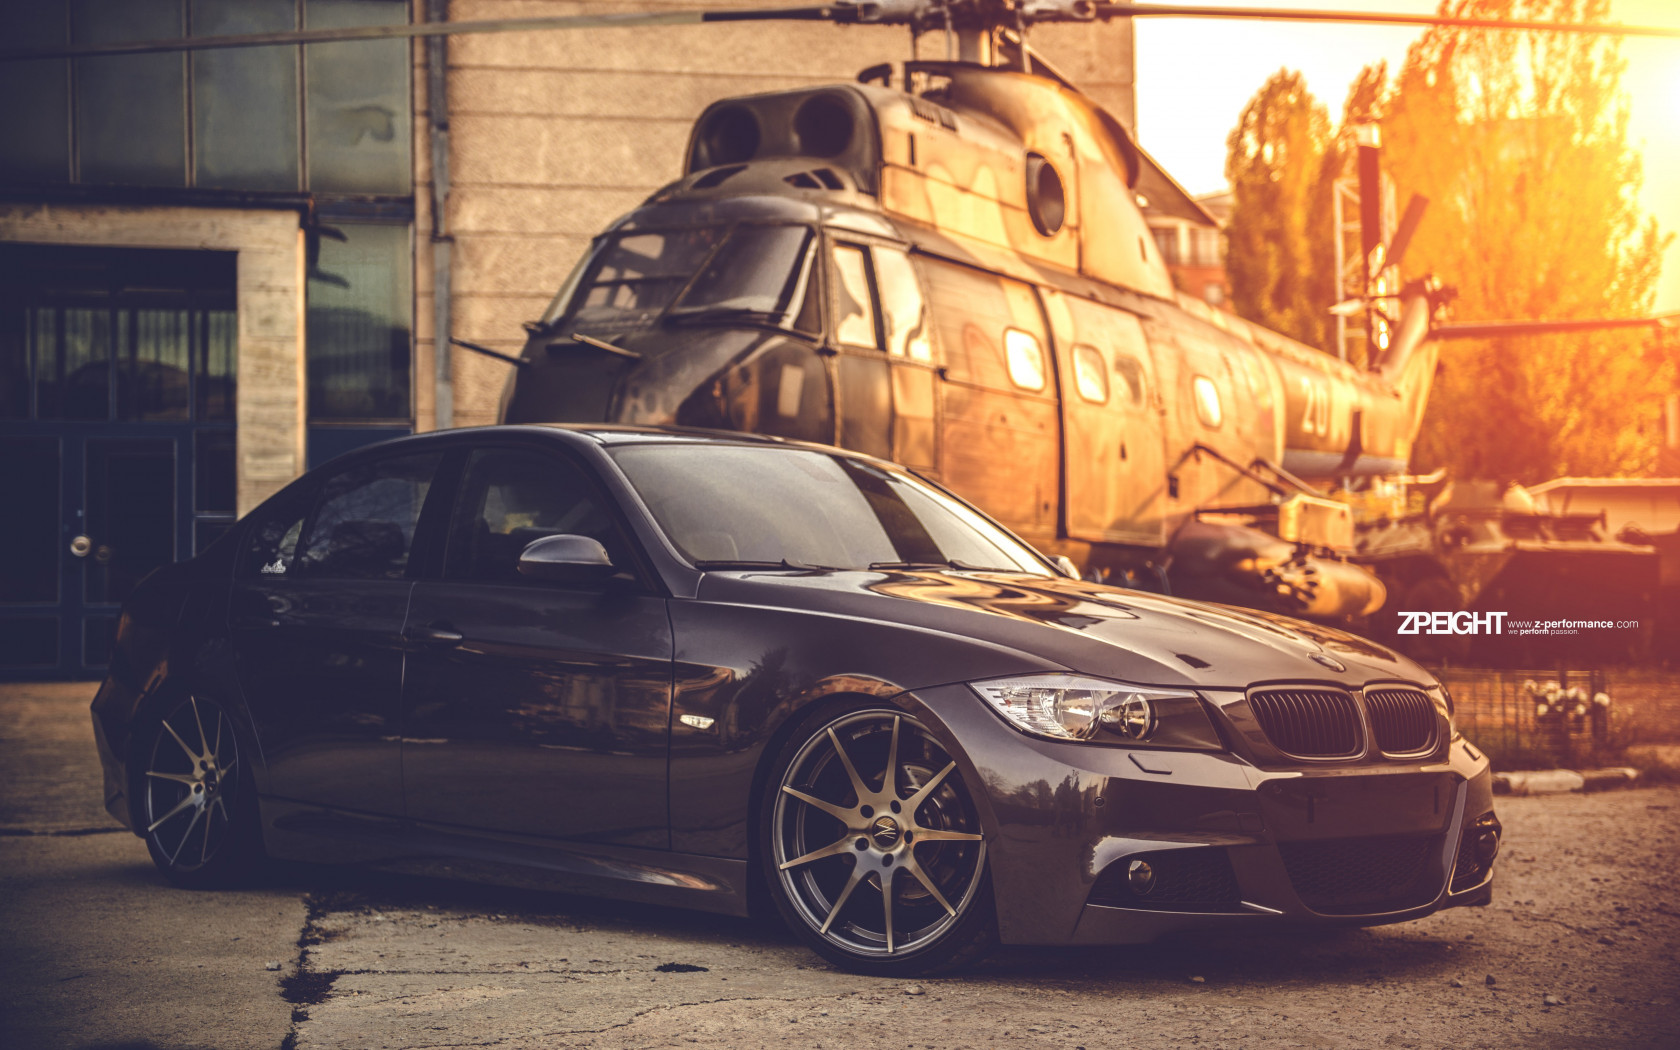 BMW E90 and one helicopter wallpaper 1680x1050